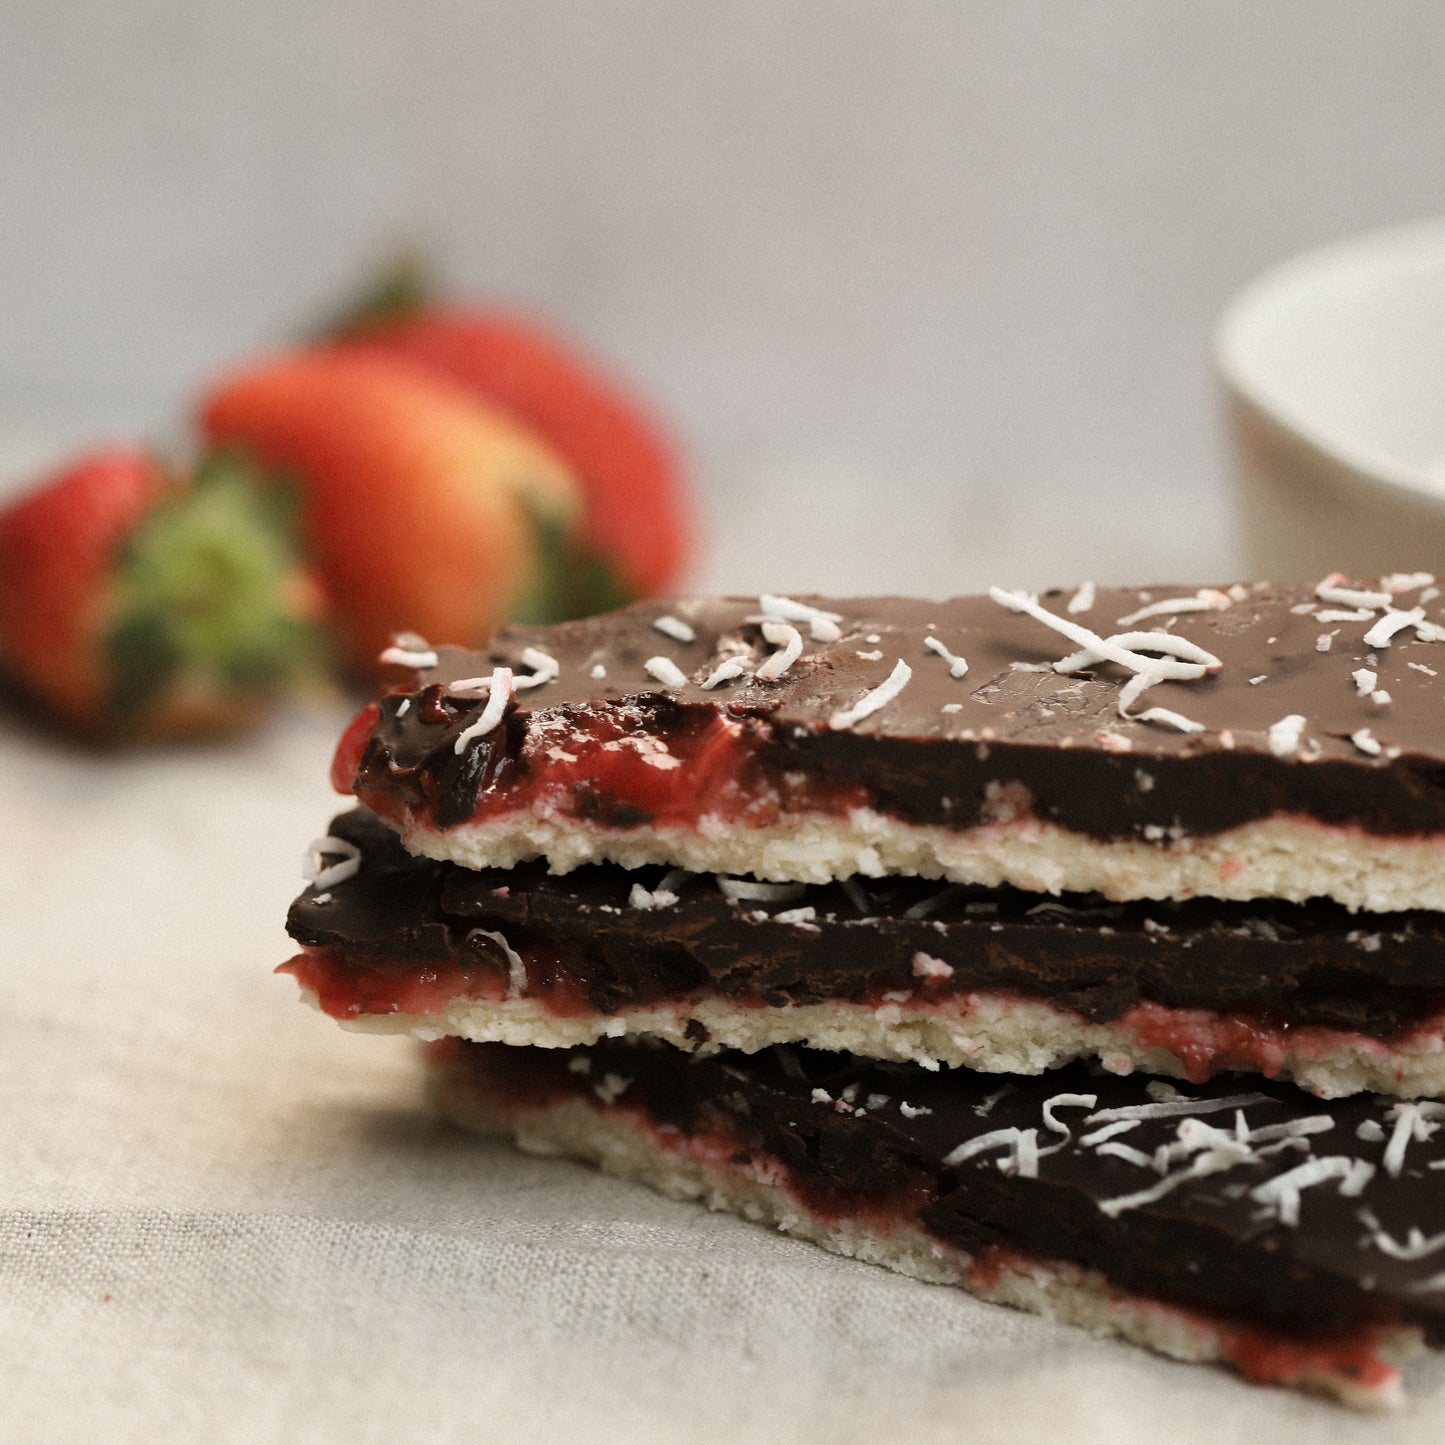 Chocolate, coconut and strawberry bars